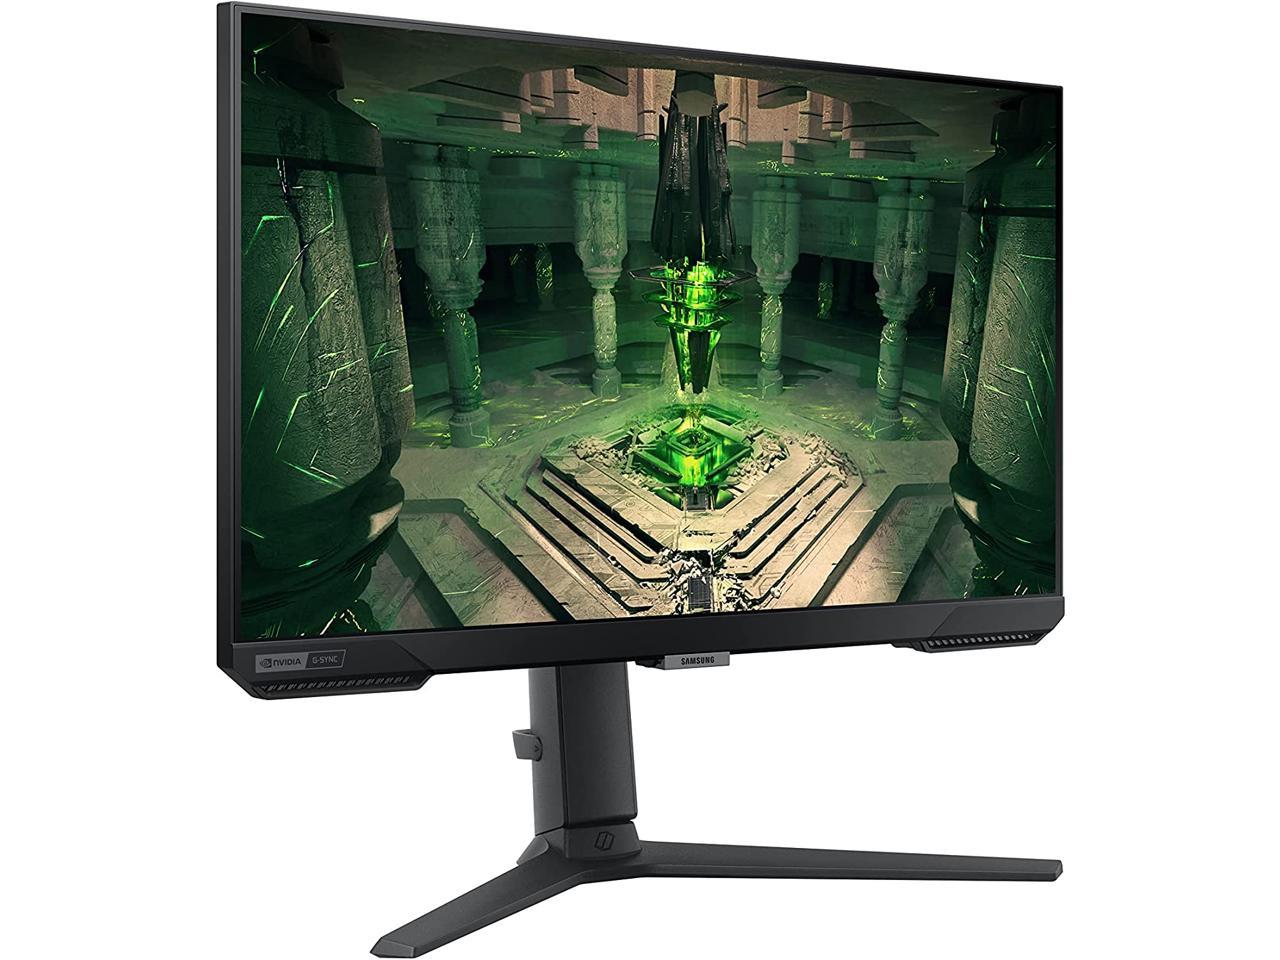 SAMSUNG Odyssey LS25BG402ENXGO G40B 25" FHD Gaming Monitor, IPS, 240Hz, 1ms, G-Sync Compatible, AMD FreeSync Premium, HDR10, Ultrawide Game View, DisplayPort, HDMI, Fully Adjustable Stand